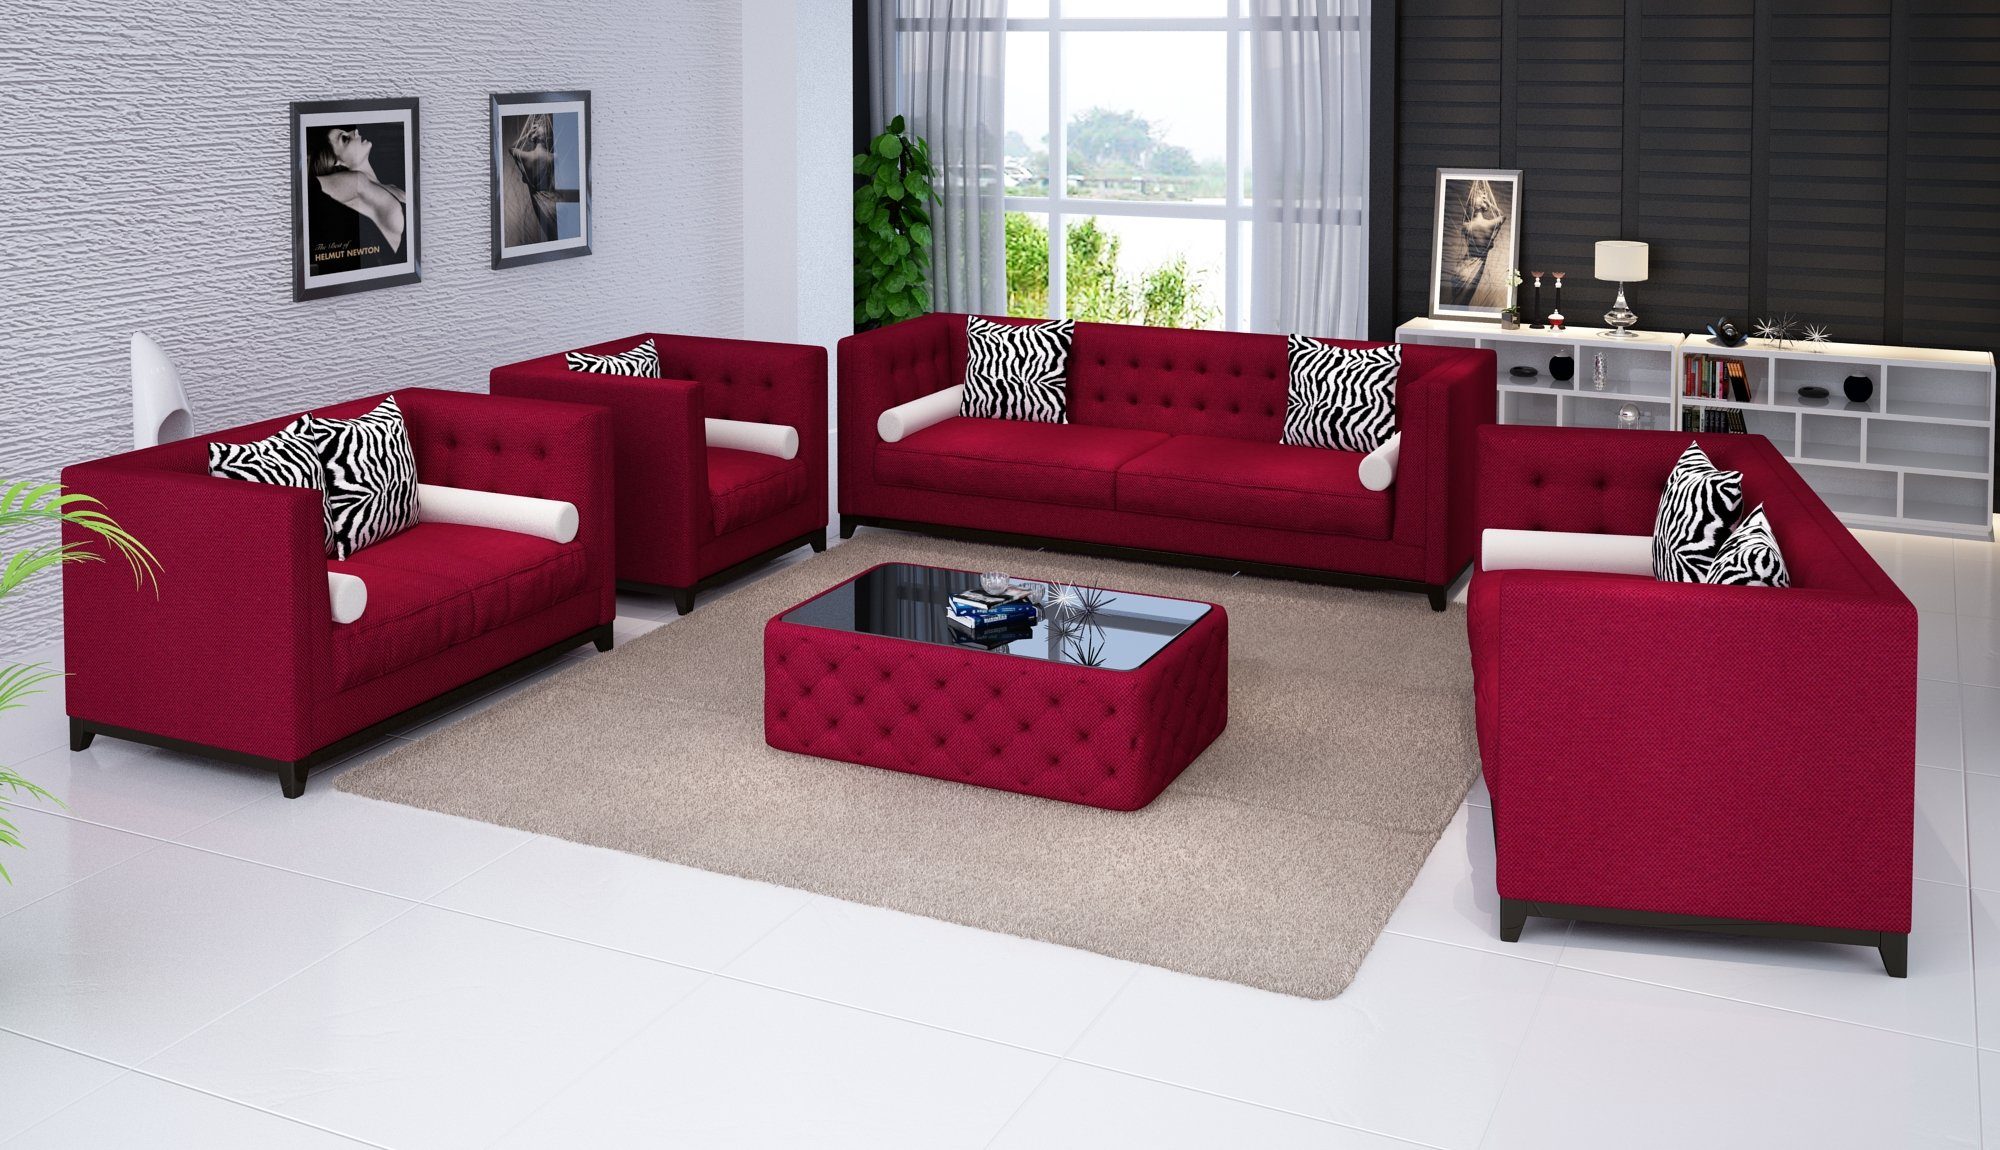 JVmoebel Sofa Rote Chesterfield Sofagarnitur Sofa Couchen Couch 3tlg Sessel, Made in Europe